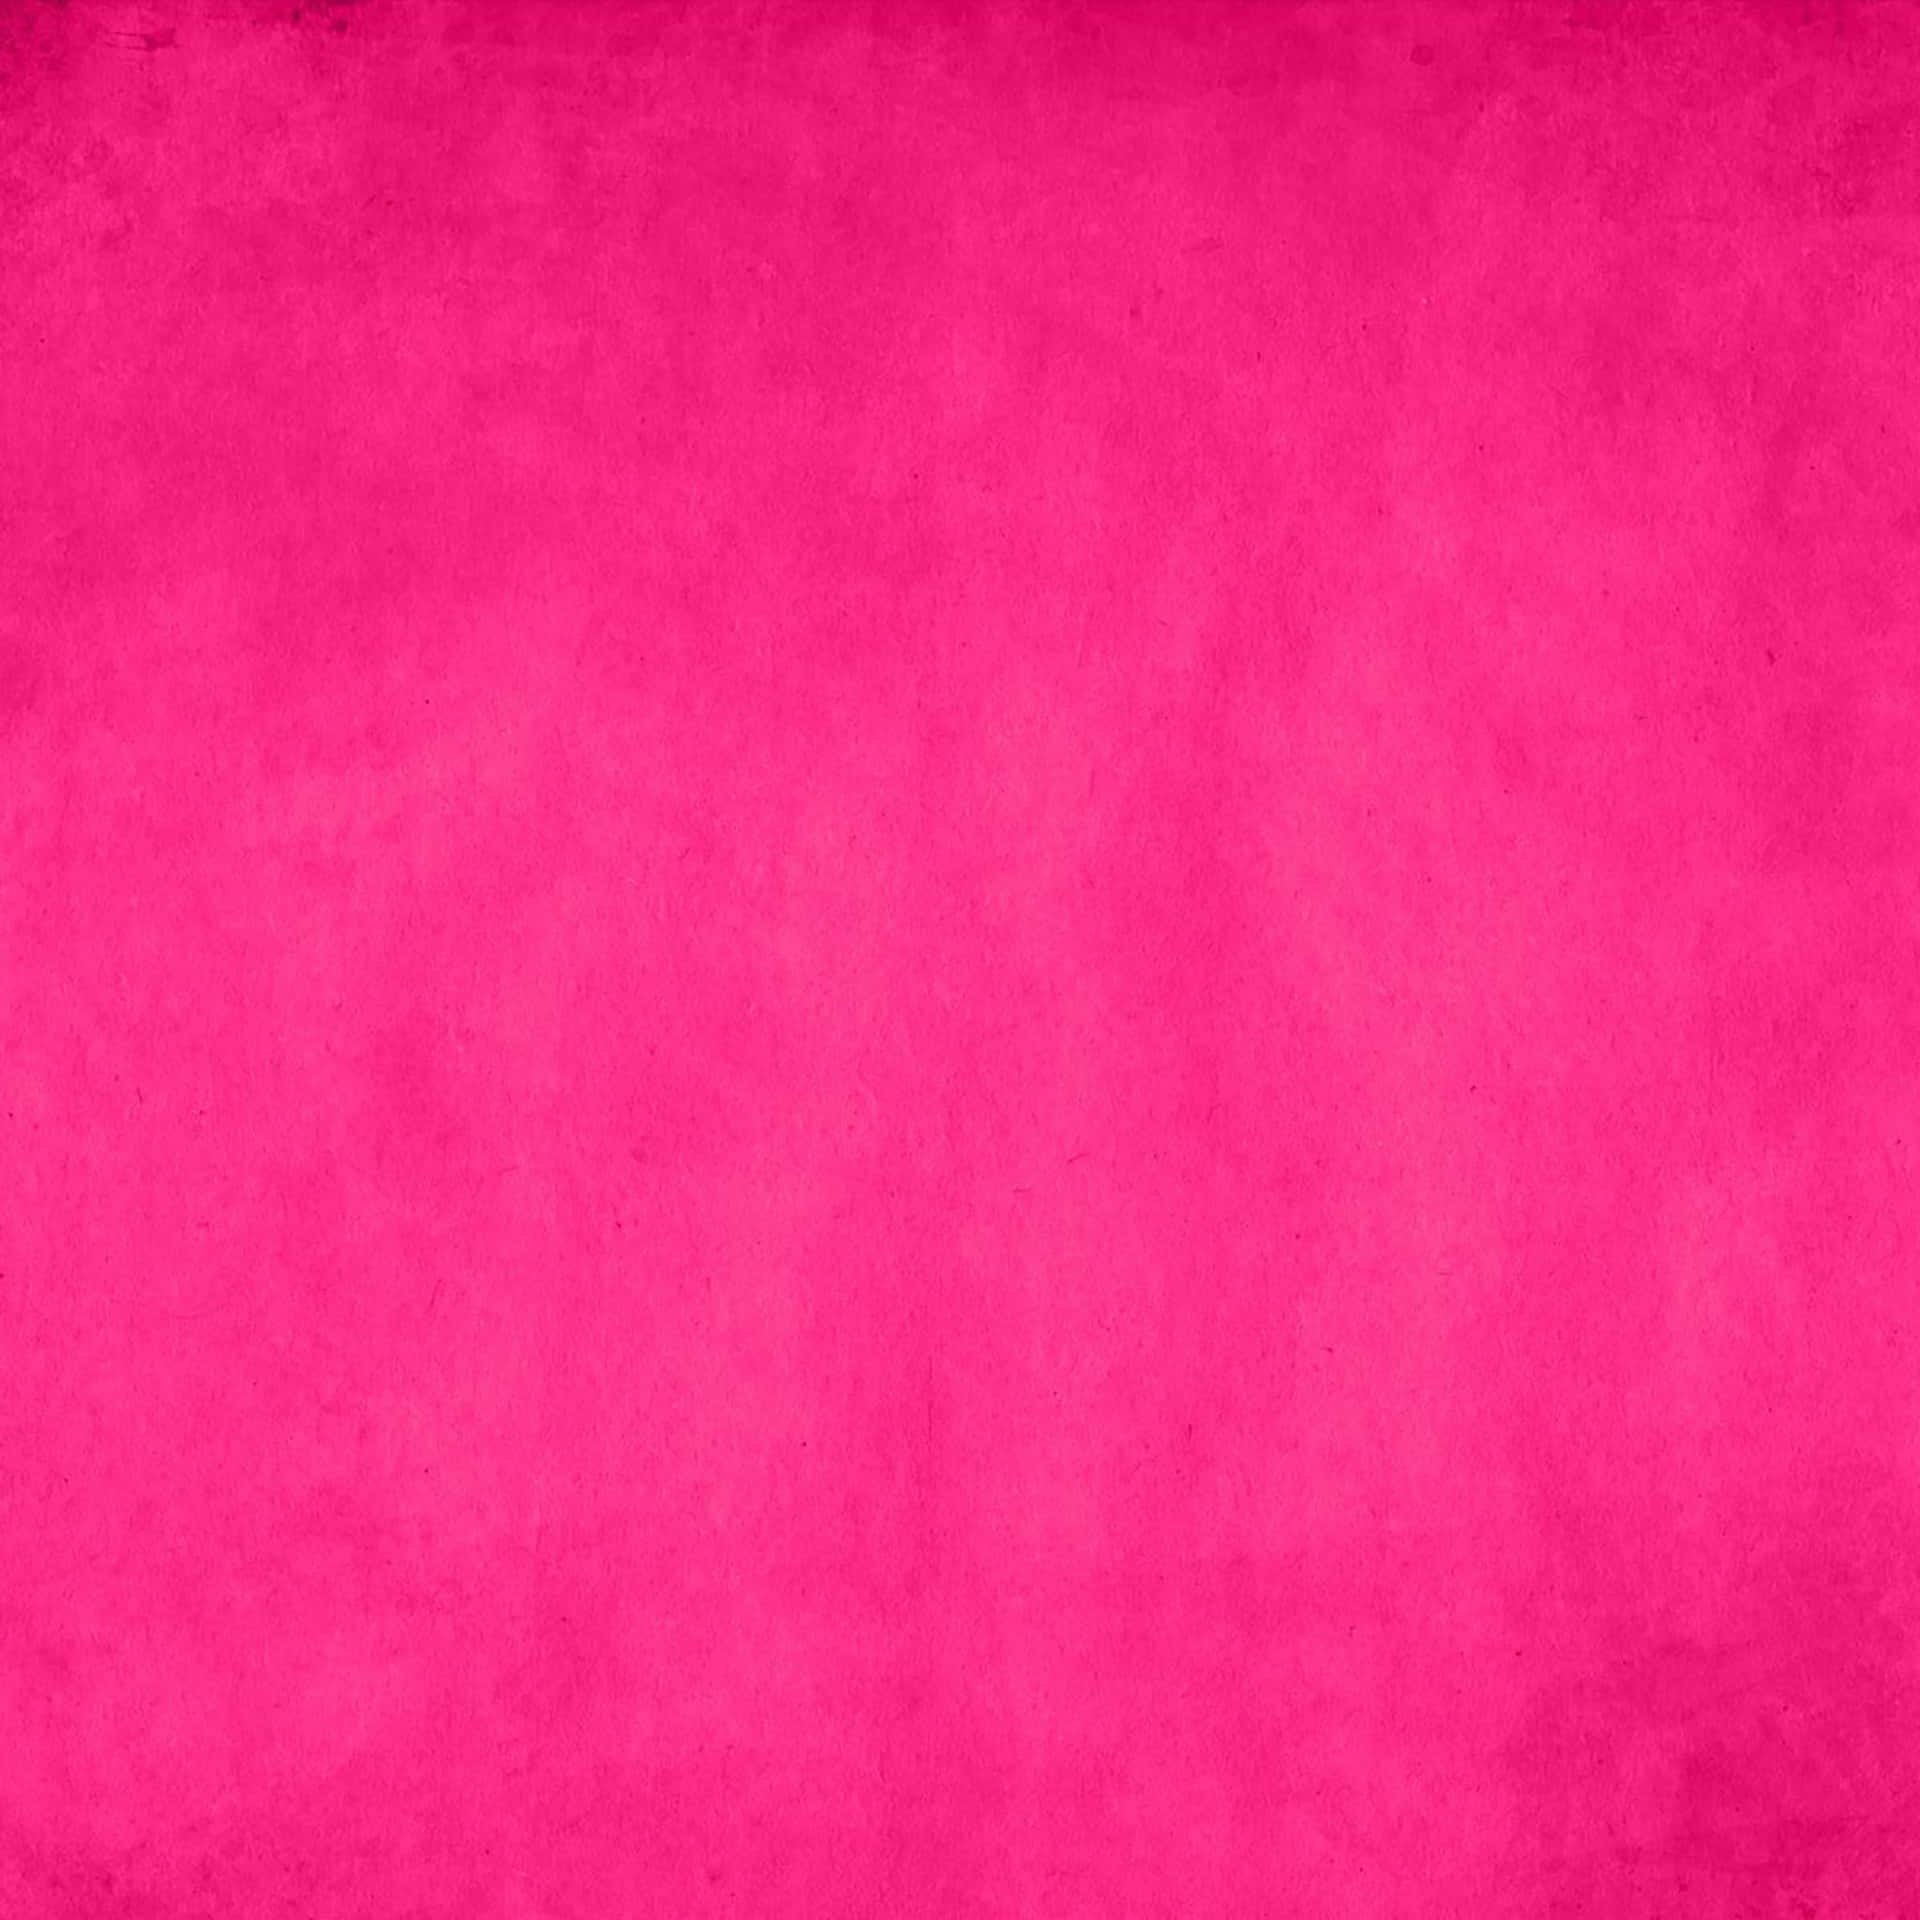 pink grunge background with a pink color Wallpaper